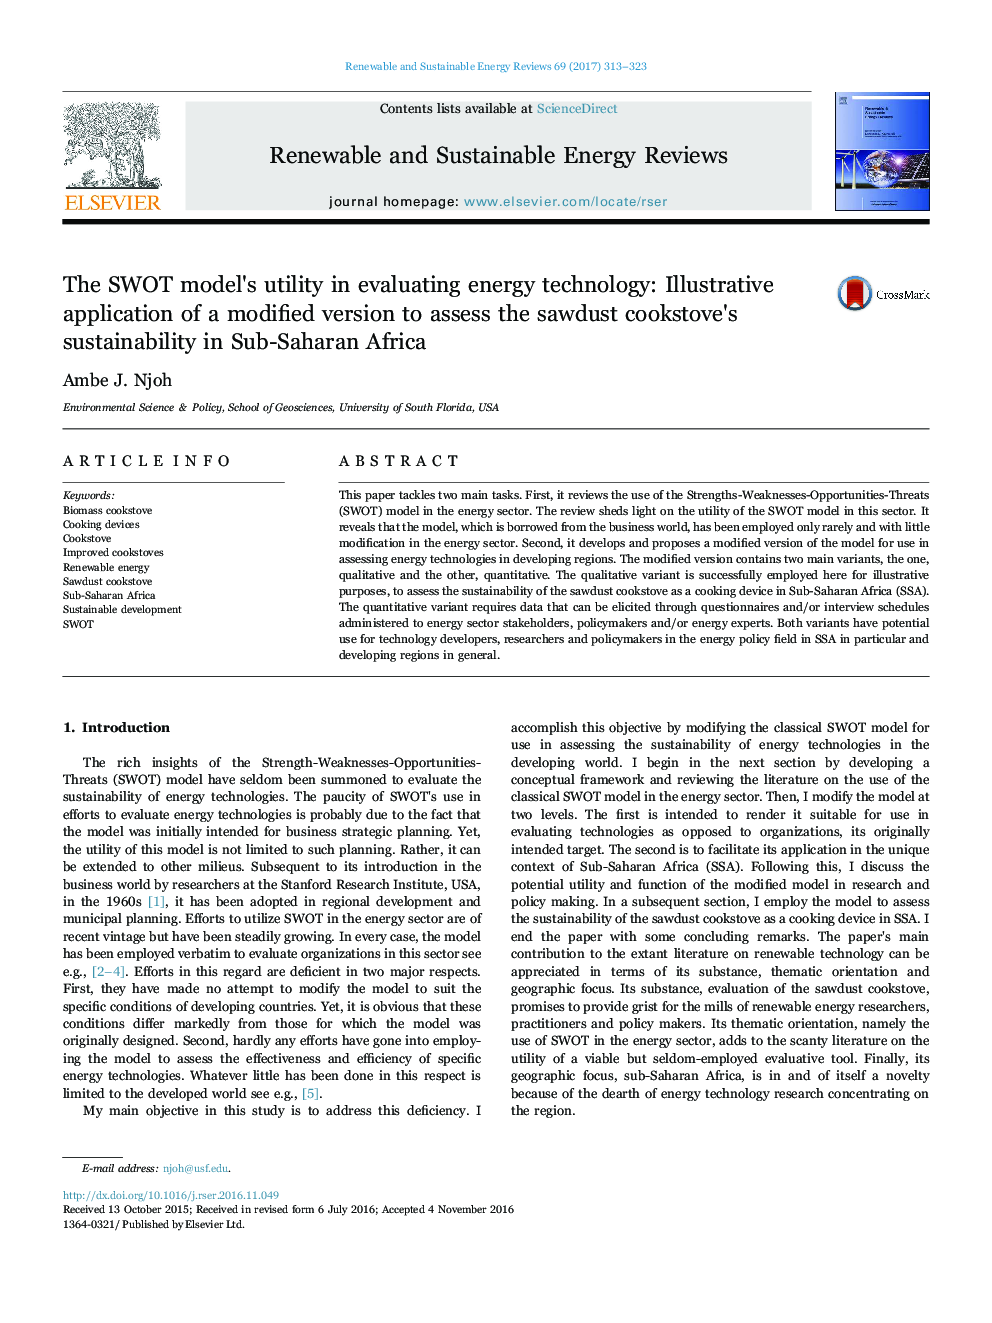 The SWOT model's utility in evaluating energy technology: Illustrative application of a modified version to assess the sawdust cookstove's sustainability in Sub-Saharan Africa